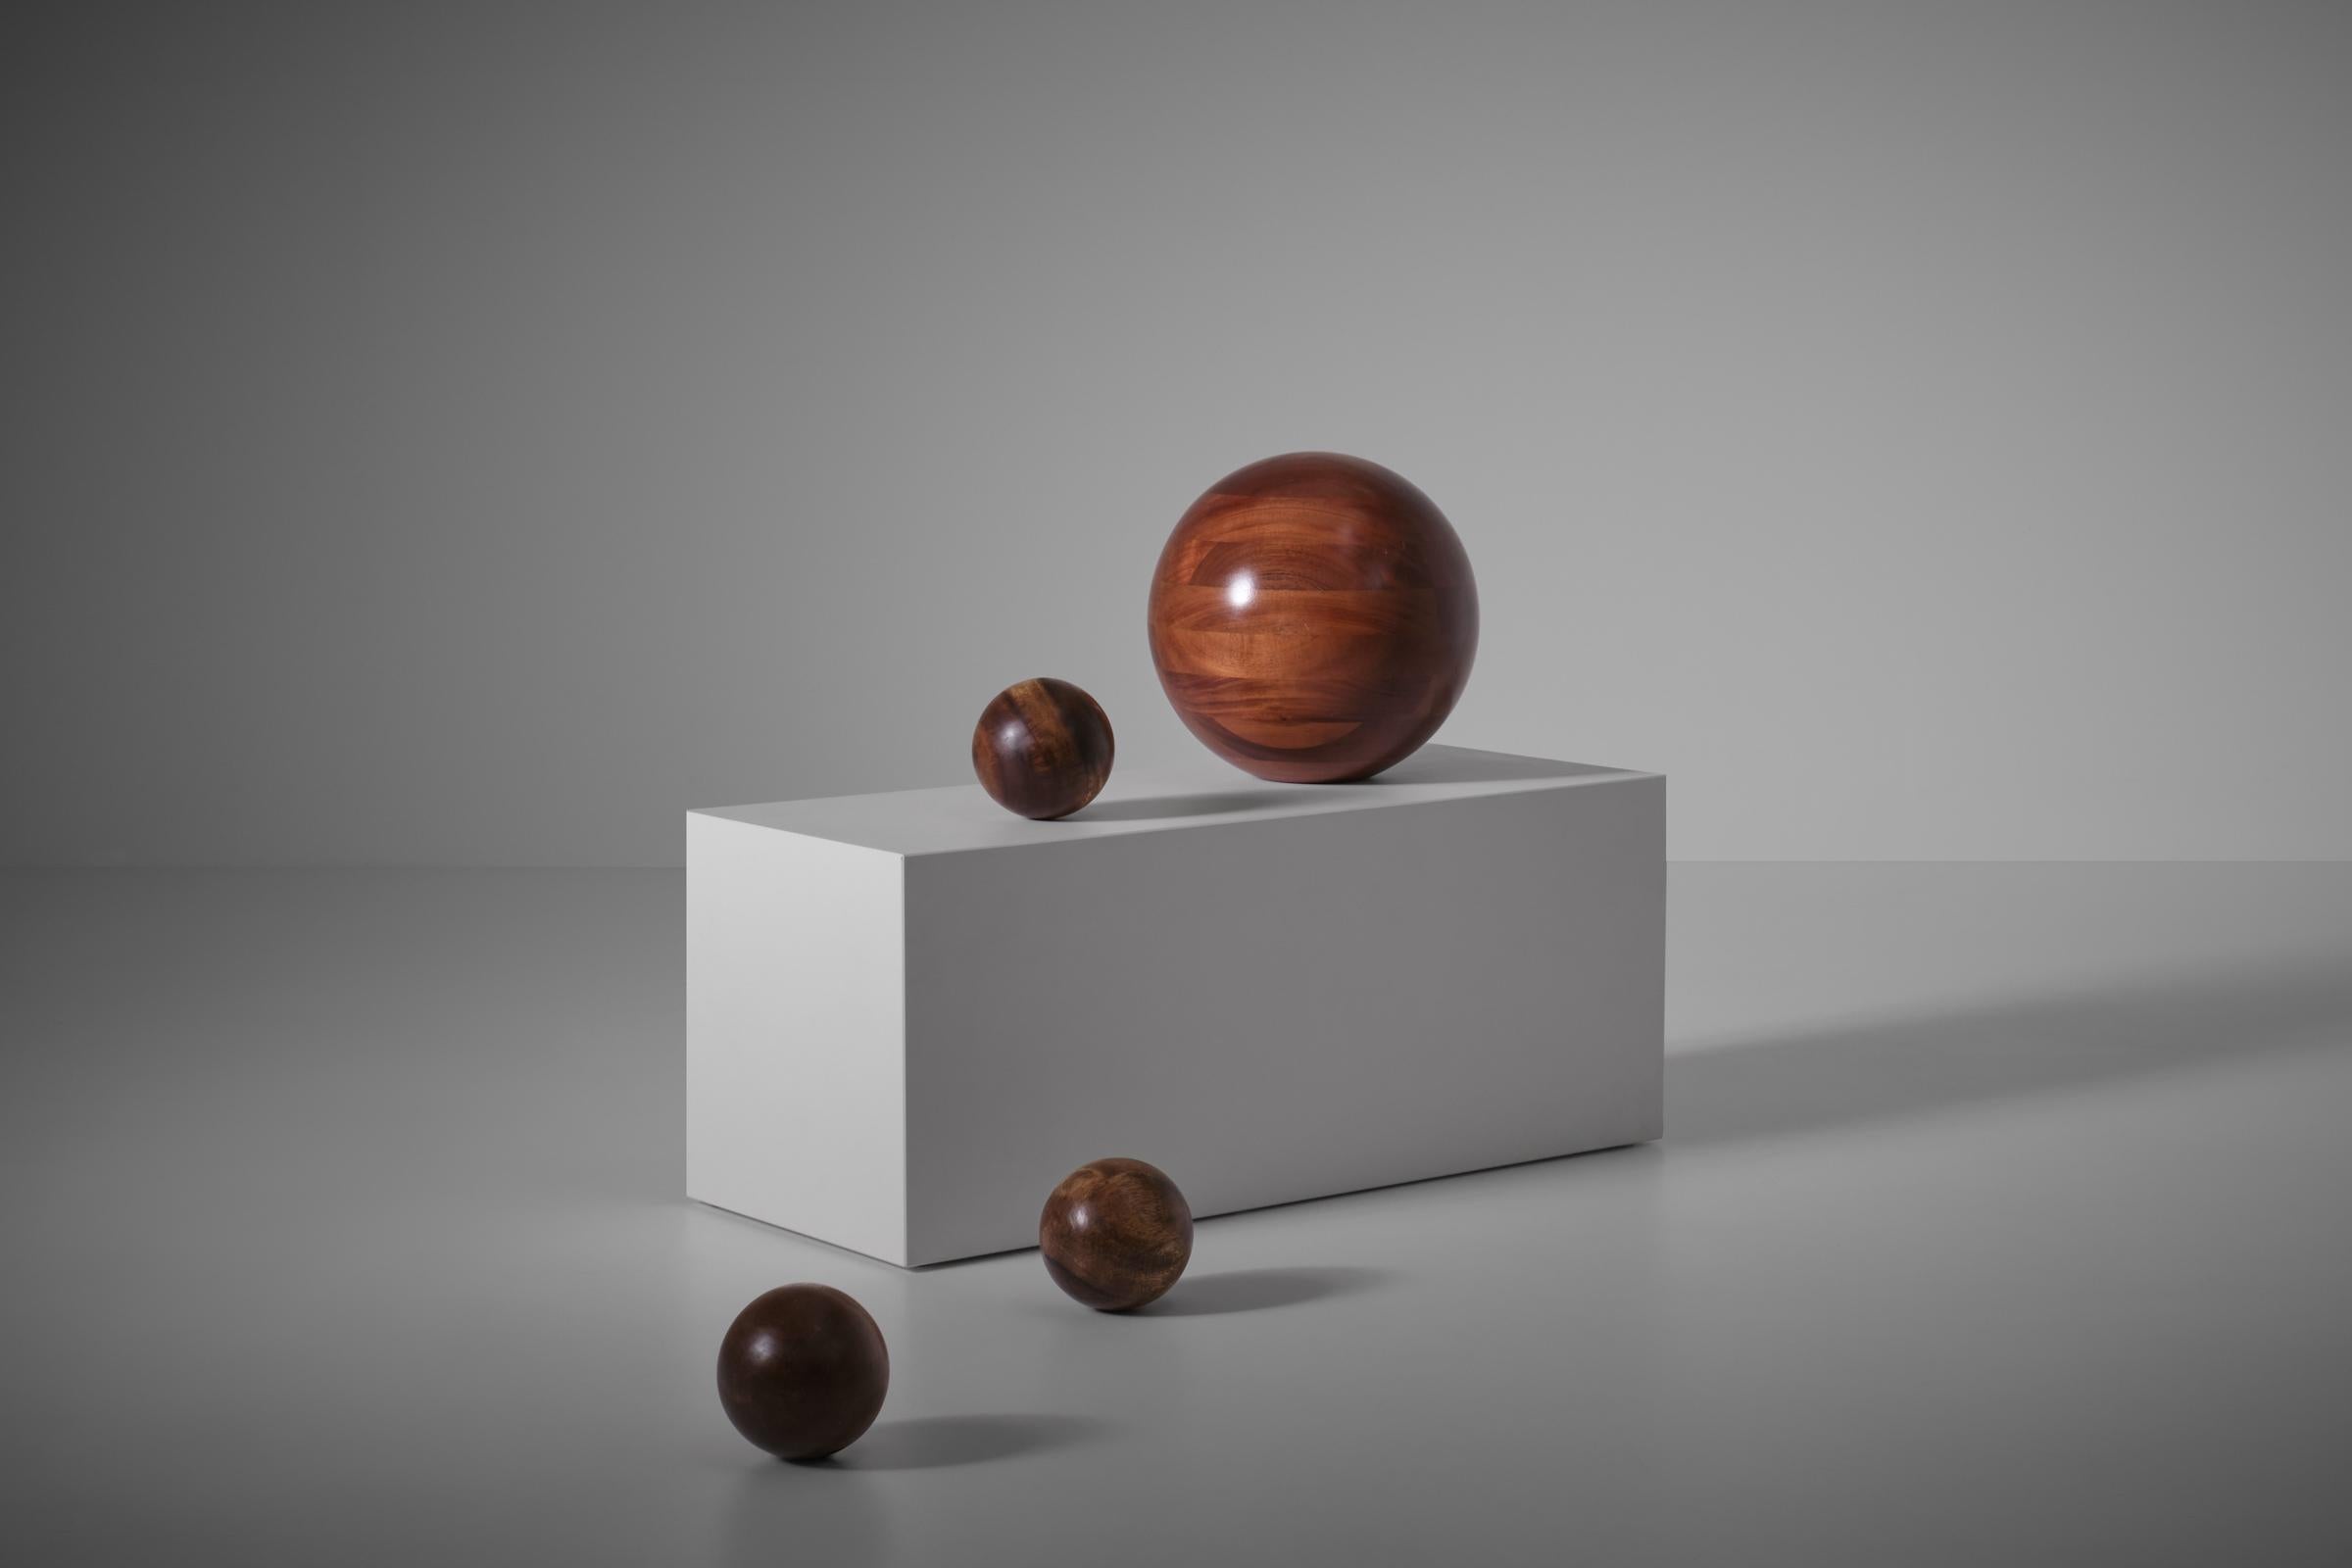 Set of four solid wooden balls, 1970s. Playful and decorative set made from solid Iroko wood crafted by hand in the 1970s by a specialized wood turner. The three smaller balls are ball shaped all around but once found their position the lay stable